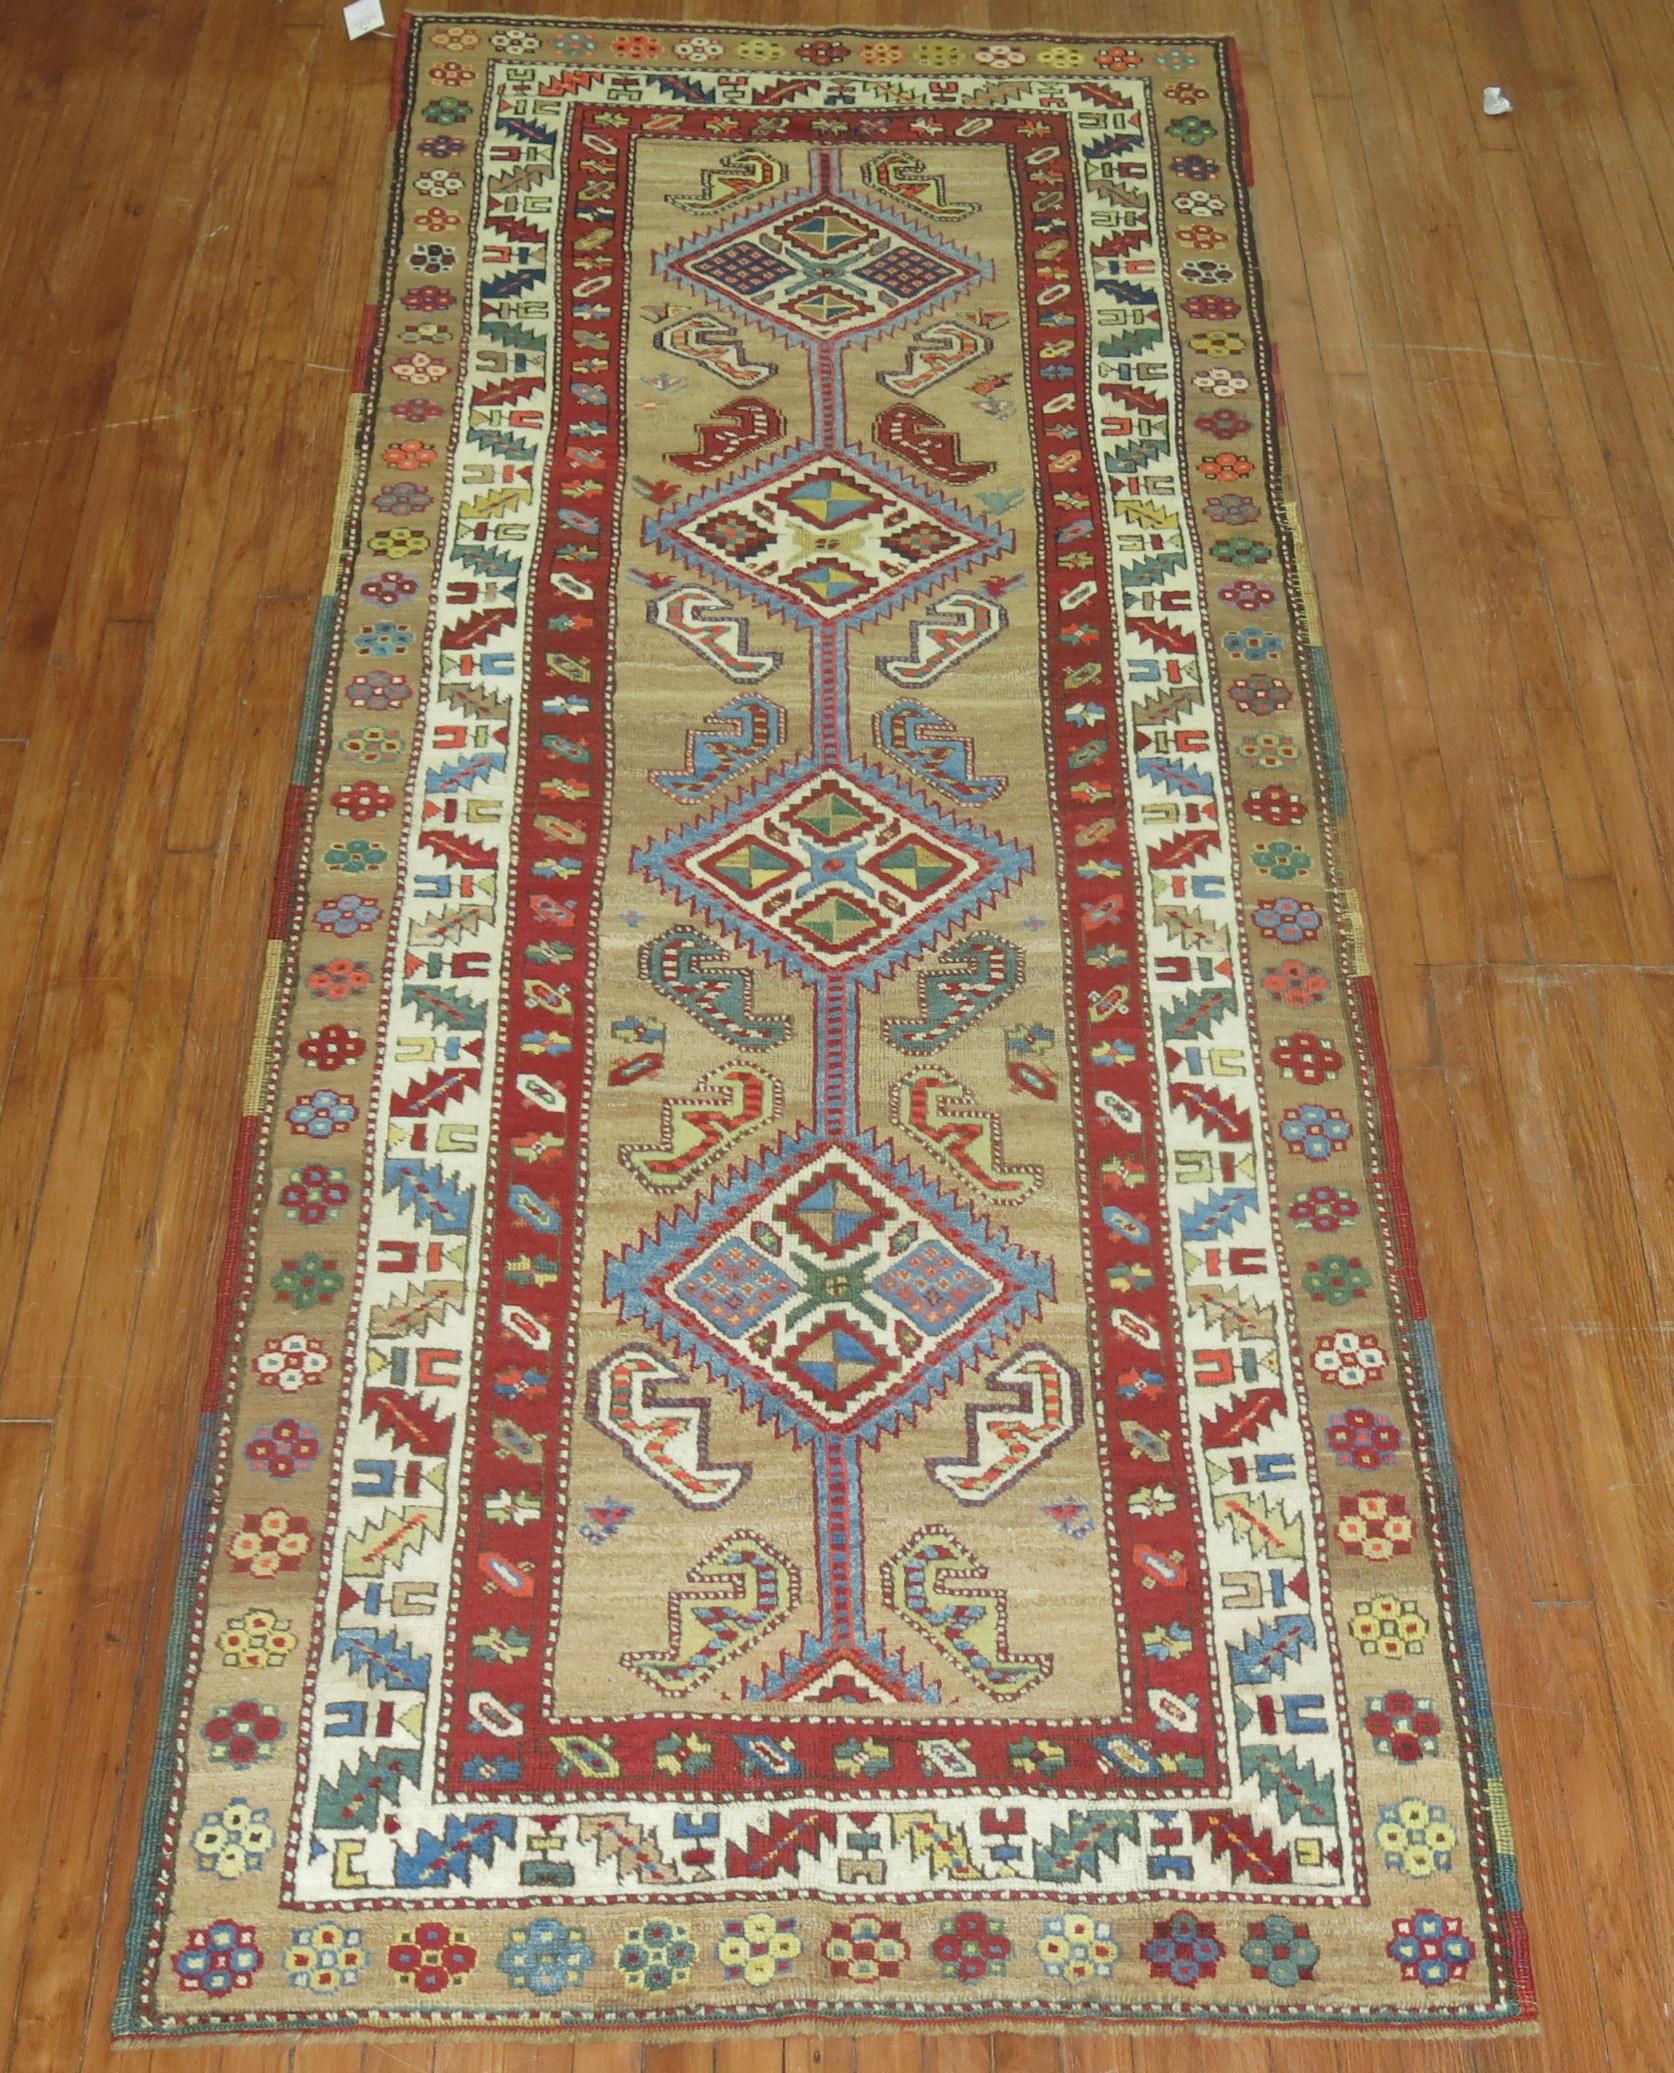 An authentic early 20th century Persian Serab runner with 4 colorful geometric medallions on a camel field and multi-band border in red, ivory and camel. Pops of orange and green are found elsewhere. These runners are usually found narrower in